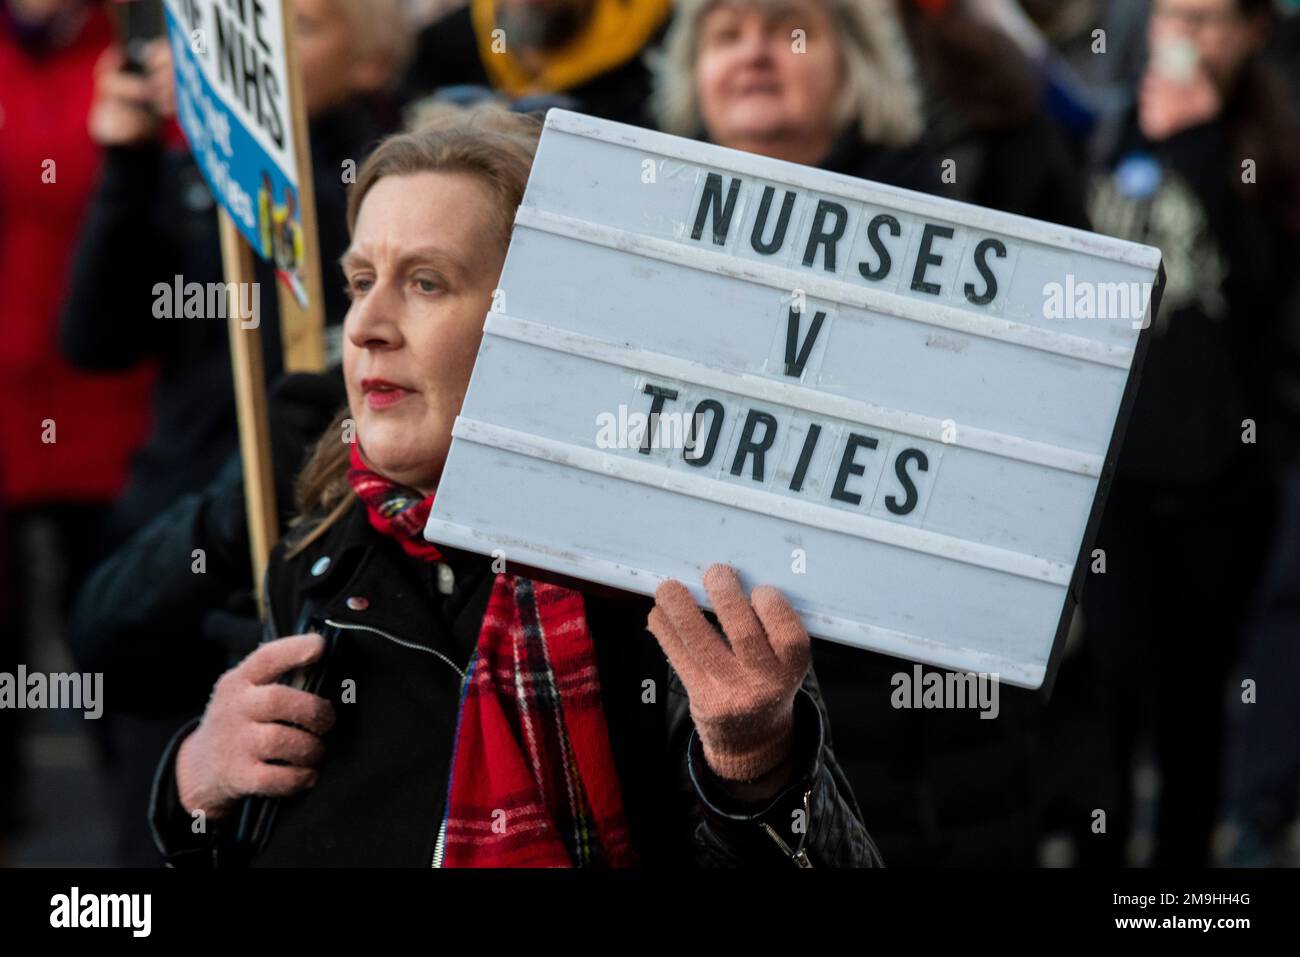 London, UK. 18th Jan, 2023. A protest rally and march is taking place in support of striking healthcare workers asking for improved pay and working conditions. Protesters gathered outside the UCL and marched to Downing Street with messages for the government. Nurses v Tories Stock Photo